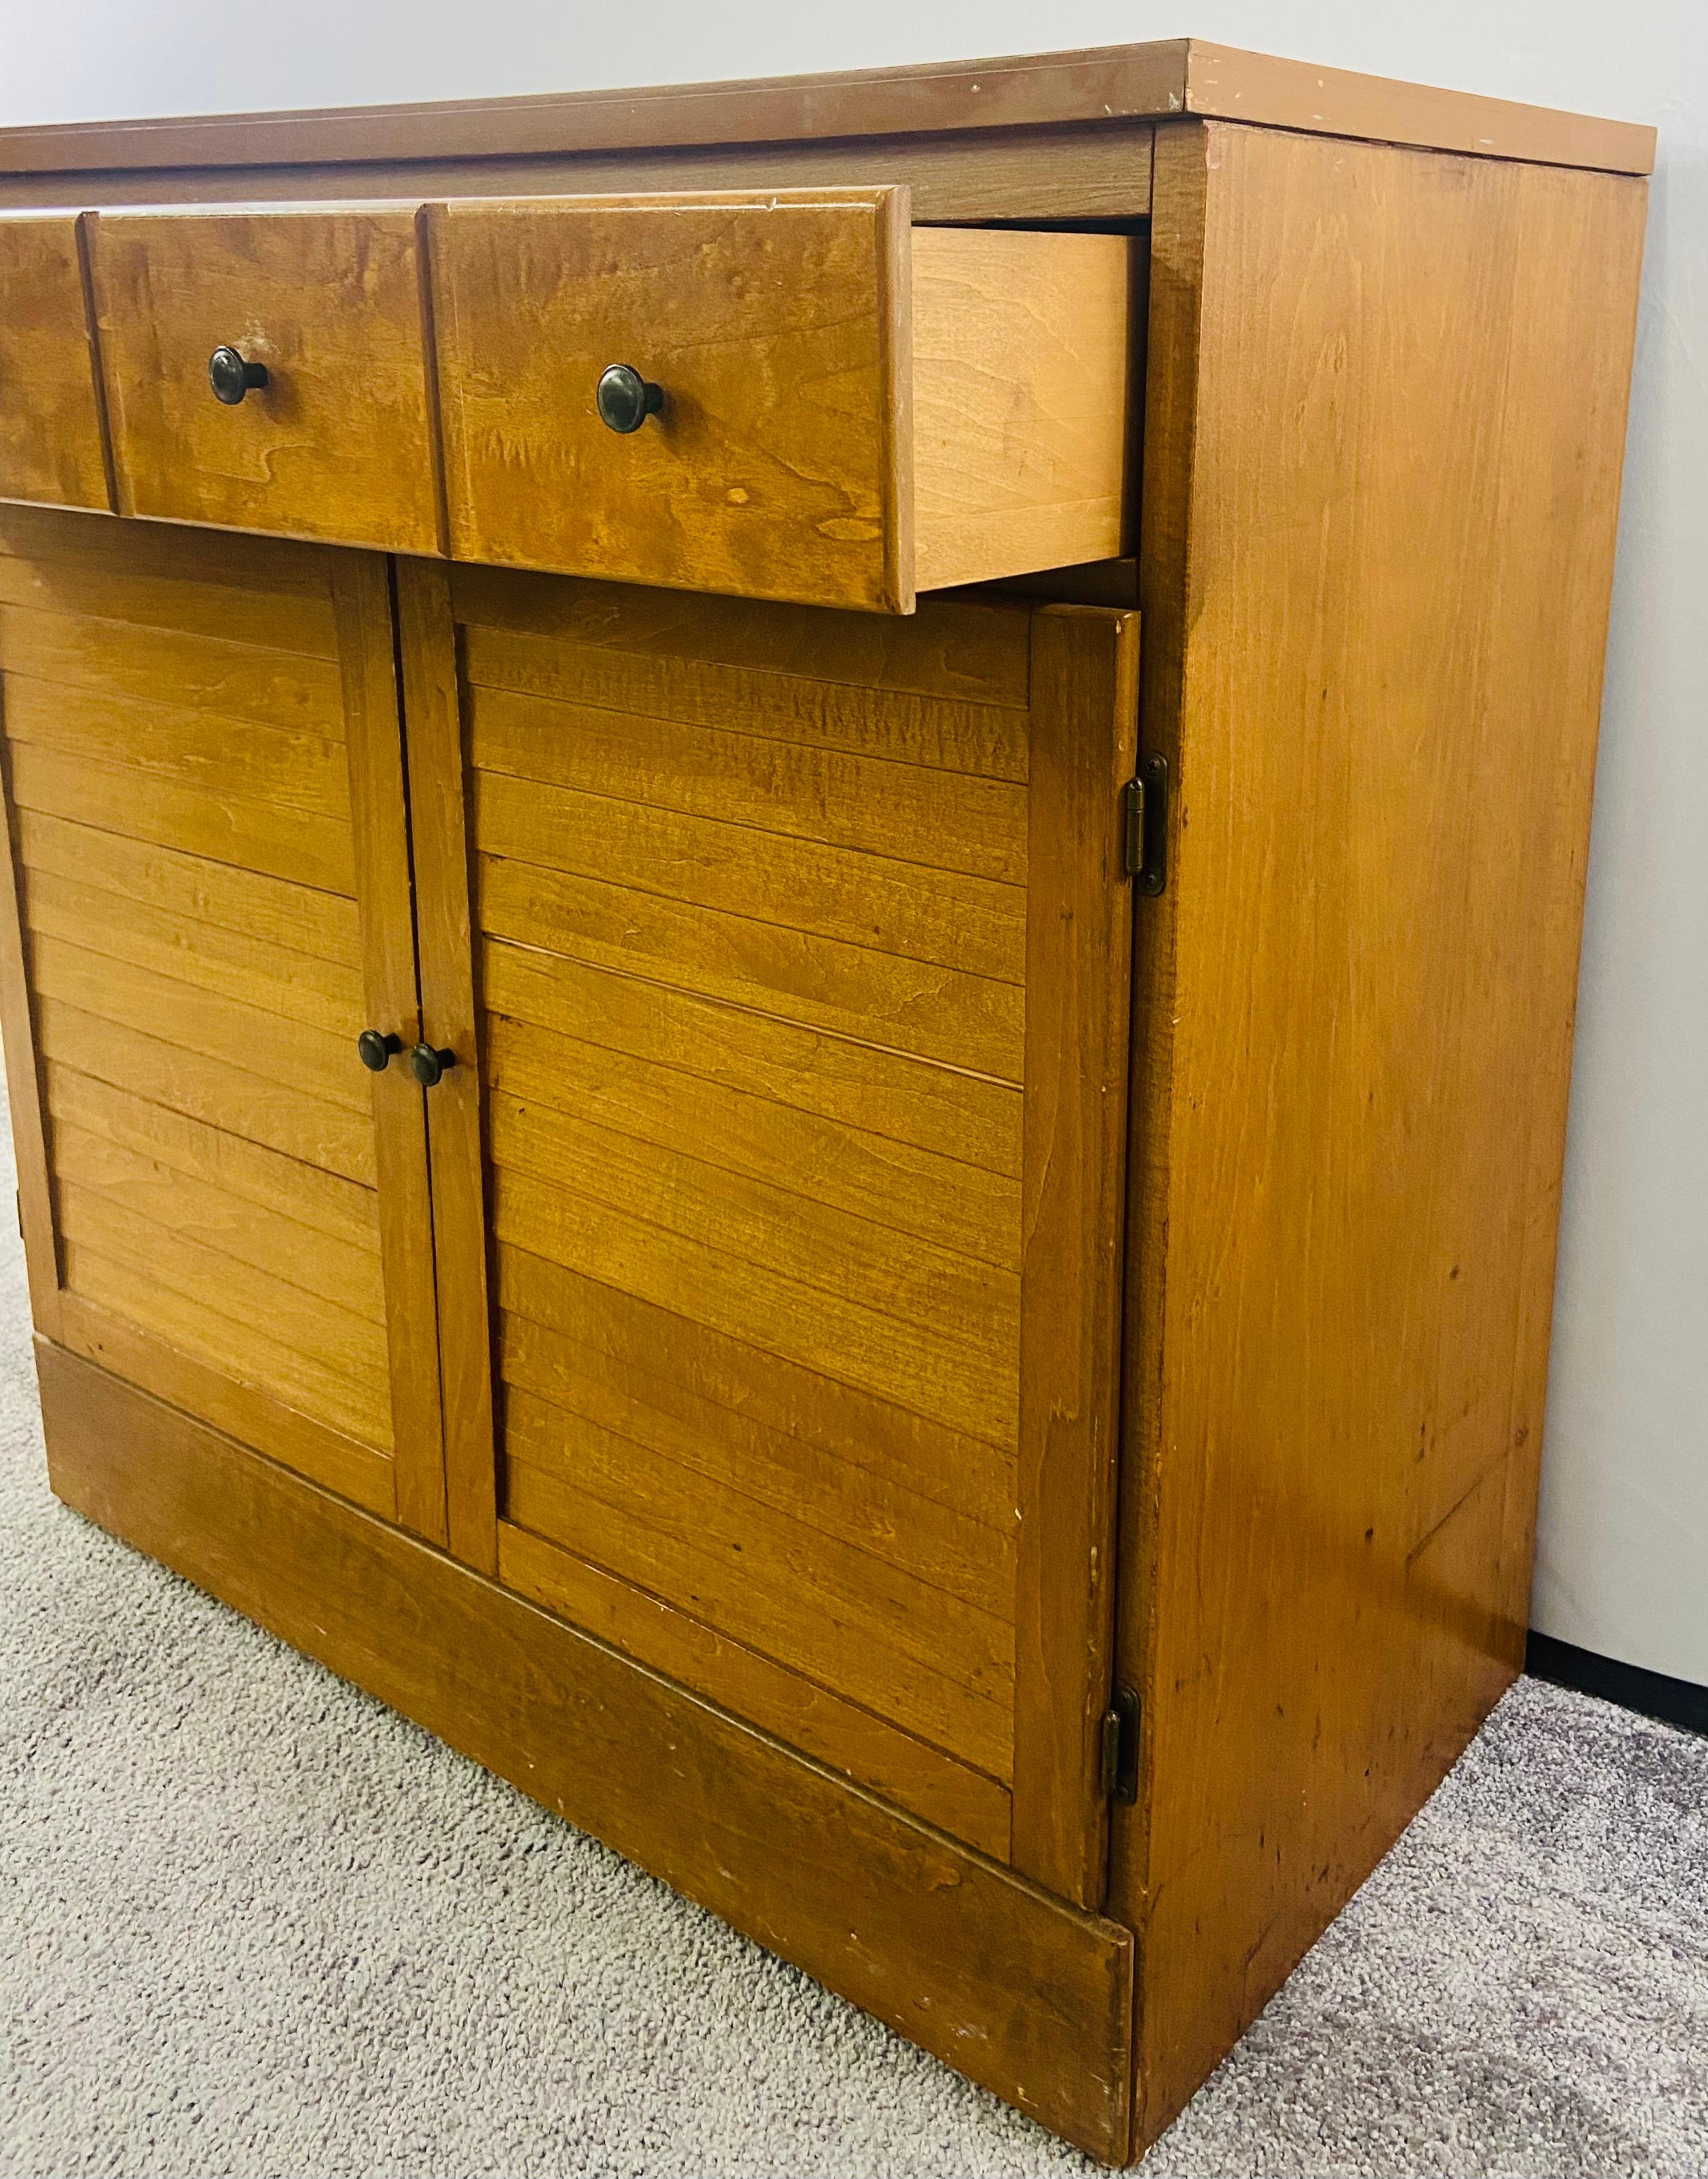 20th Century Mid-Century Modern Maple Wood Two-Door Chest, Nightstand or Cabinet